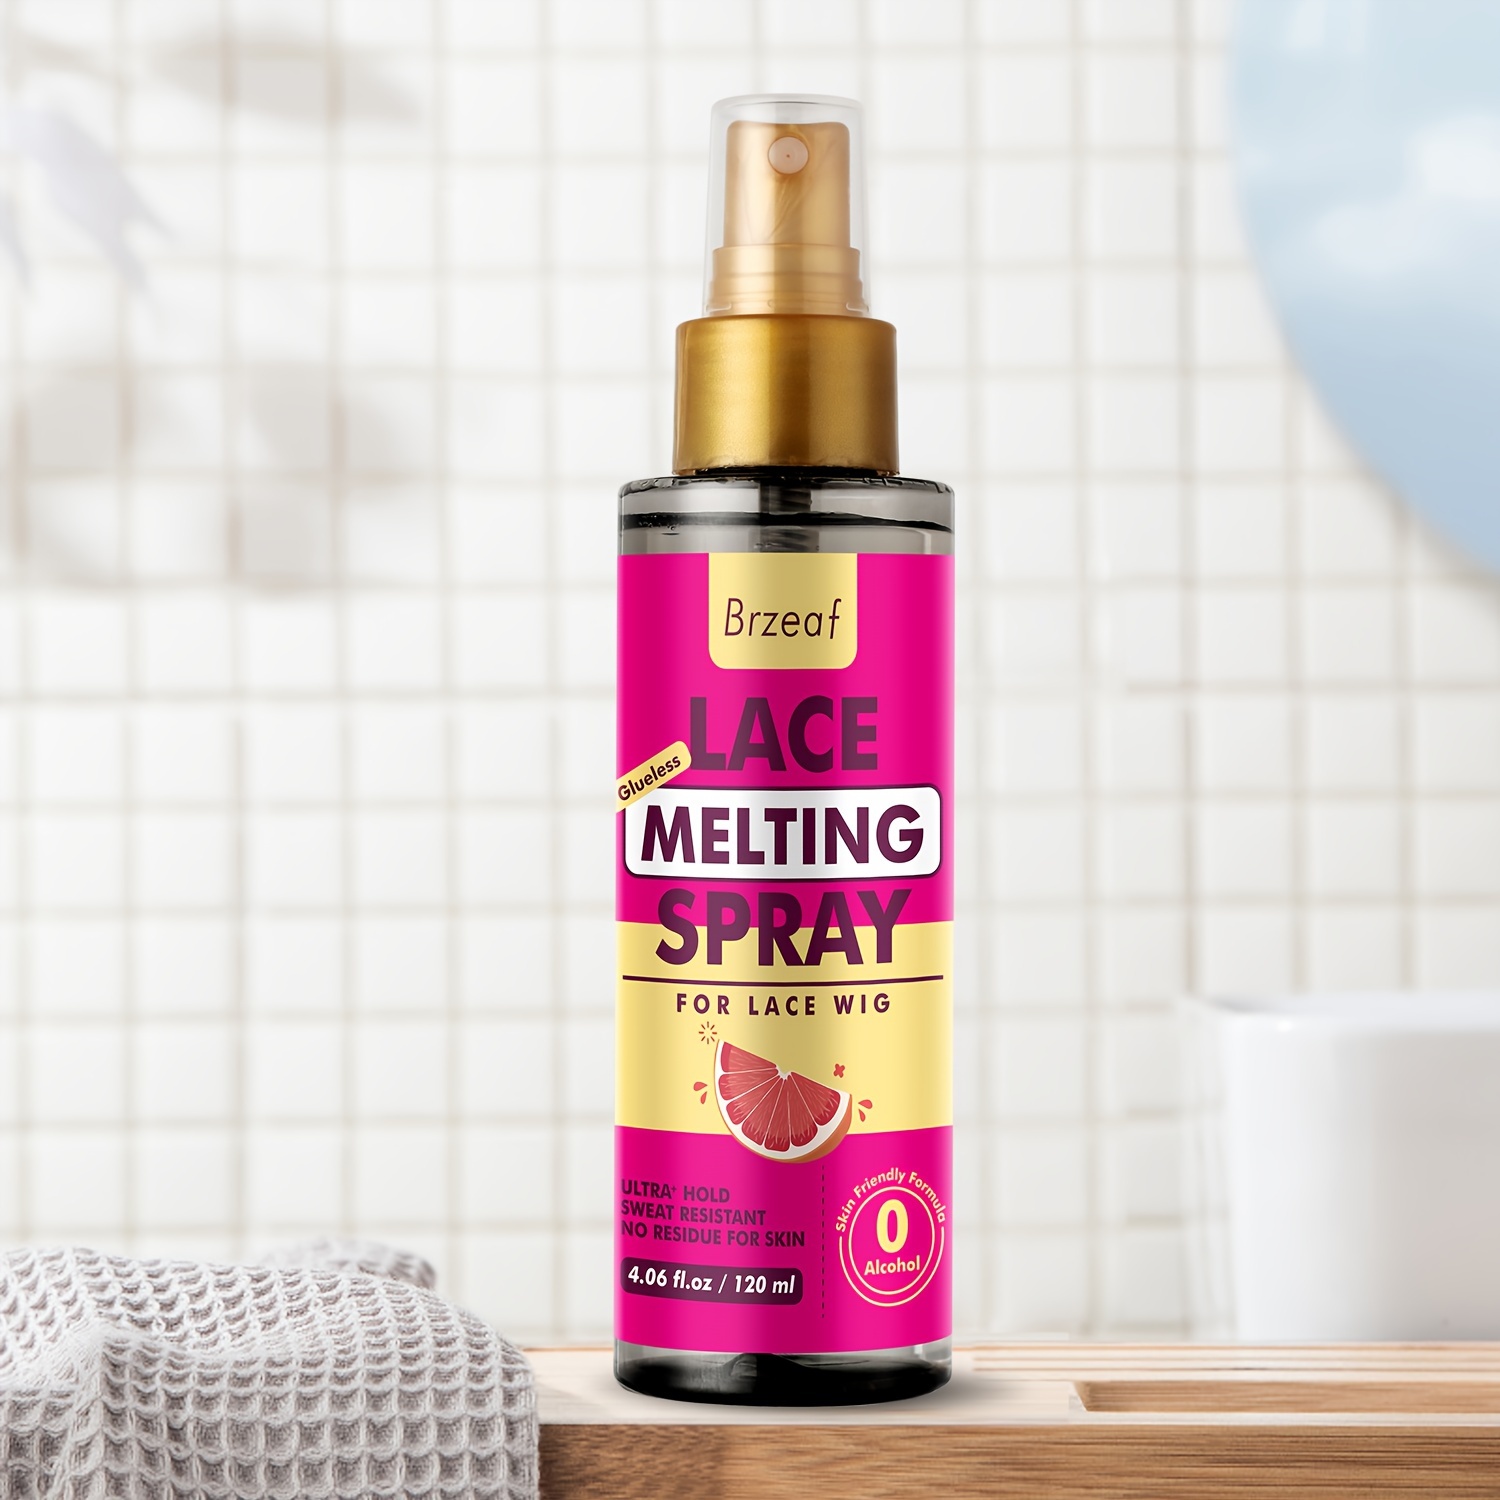 Introducing the #tintedlacemelt spray! ✨You can Tint & Melt together , Wig Lace Melting Spray